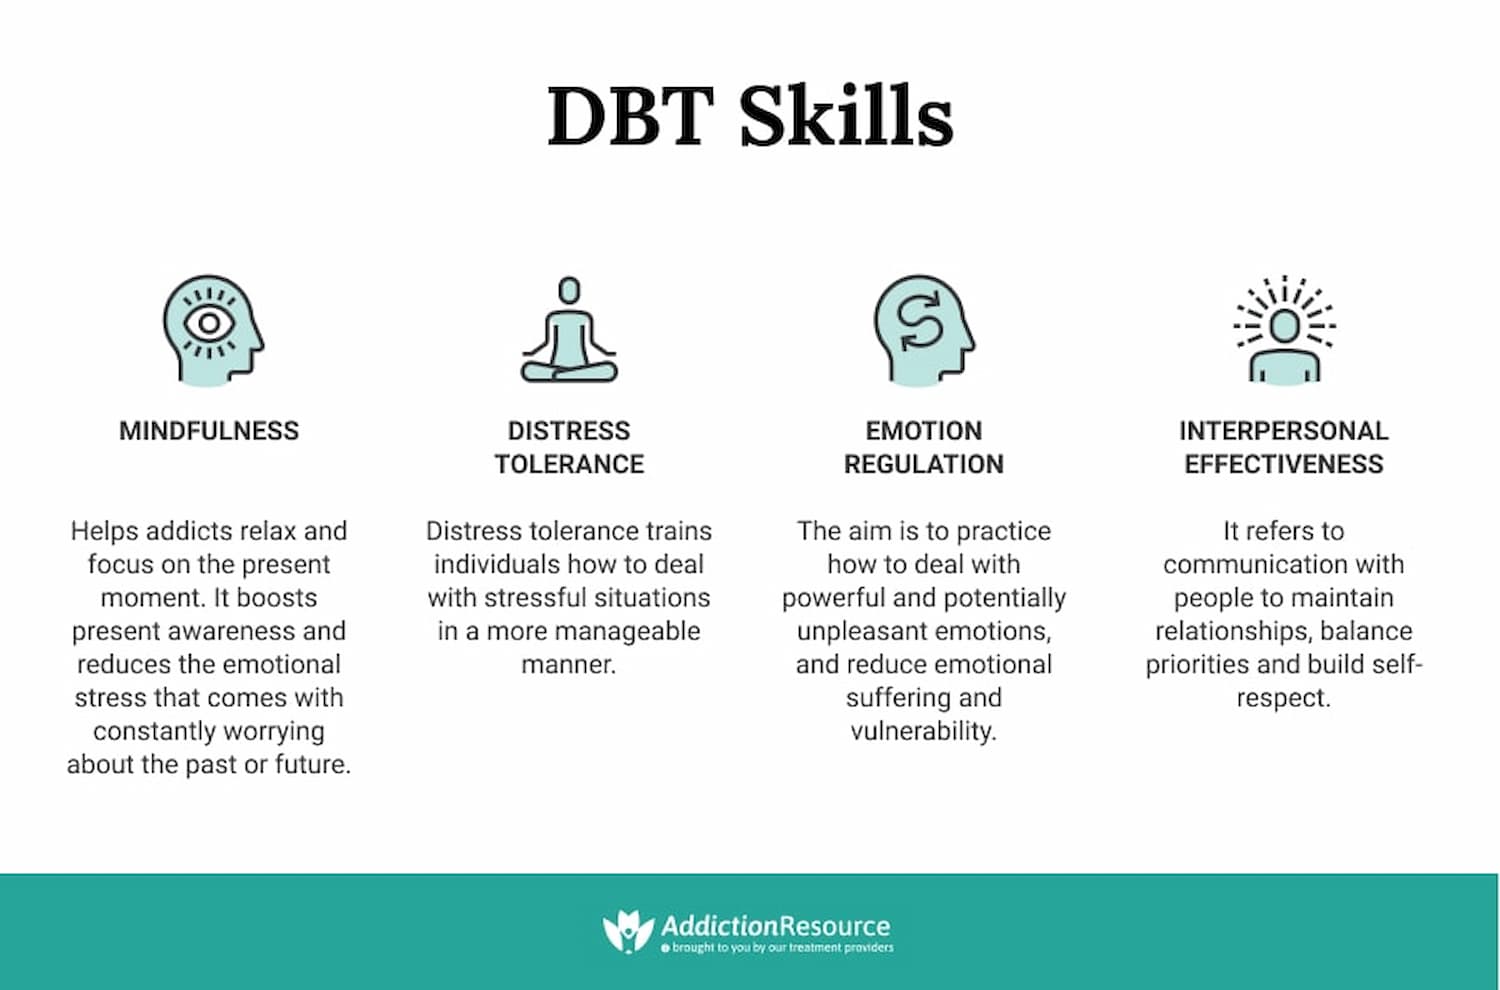 Four main skills taught in a dialectical behaviour therapy (DBT) session